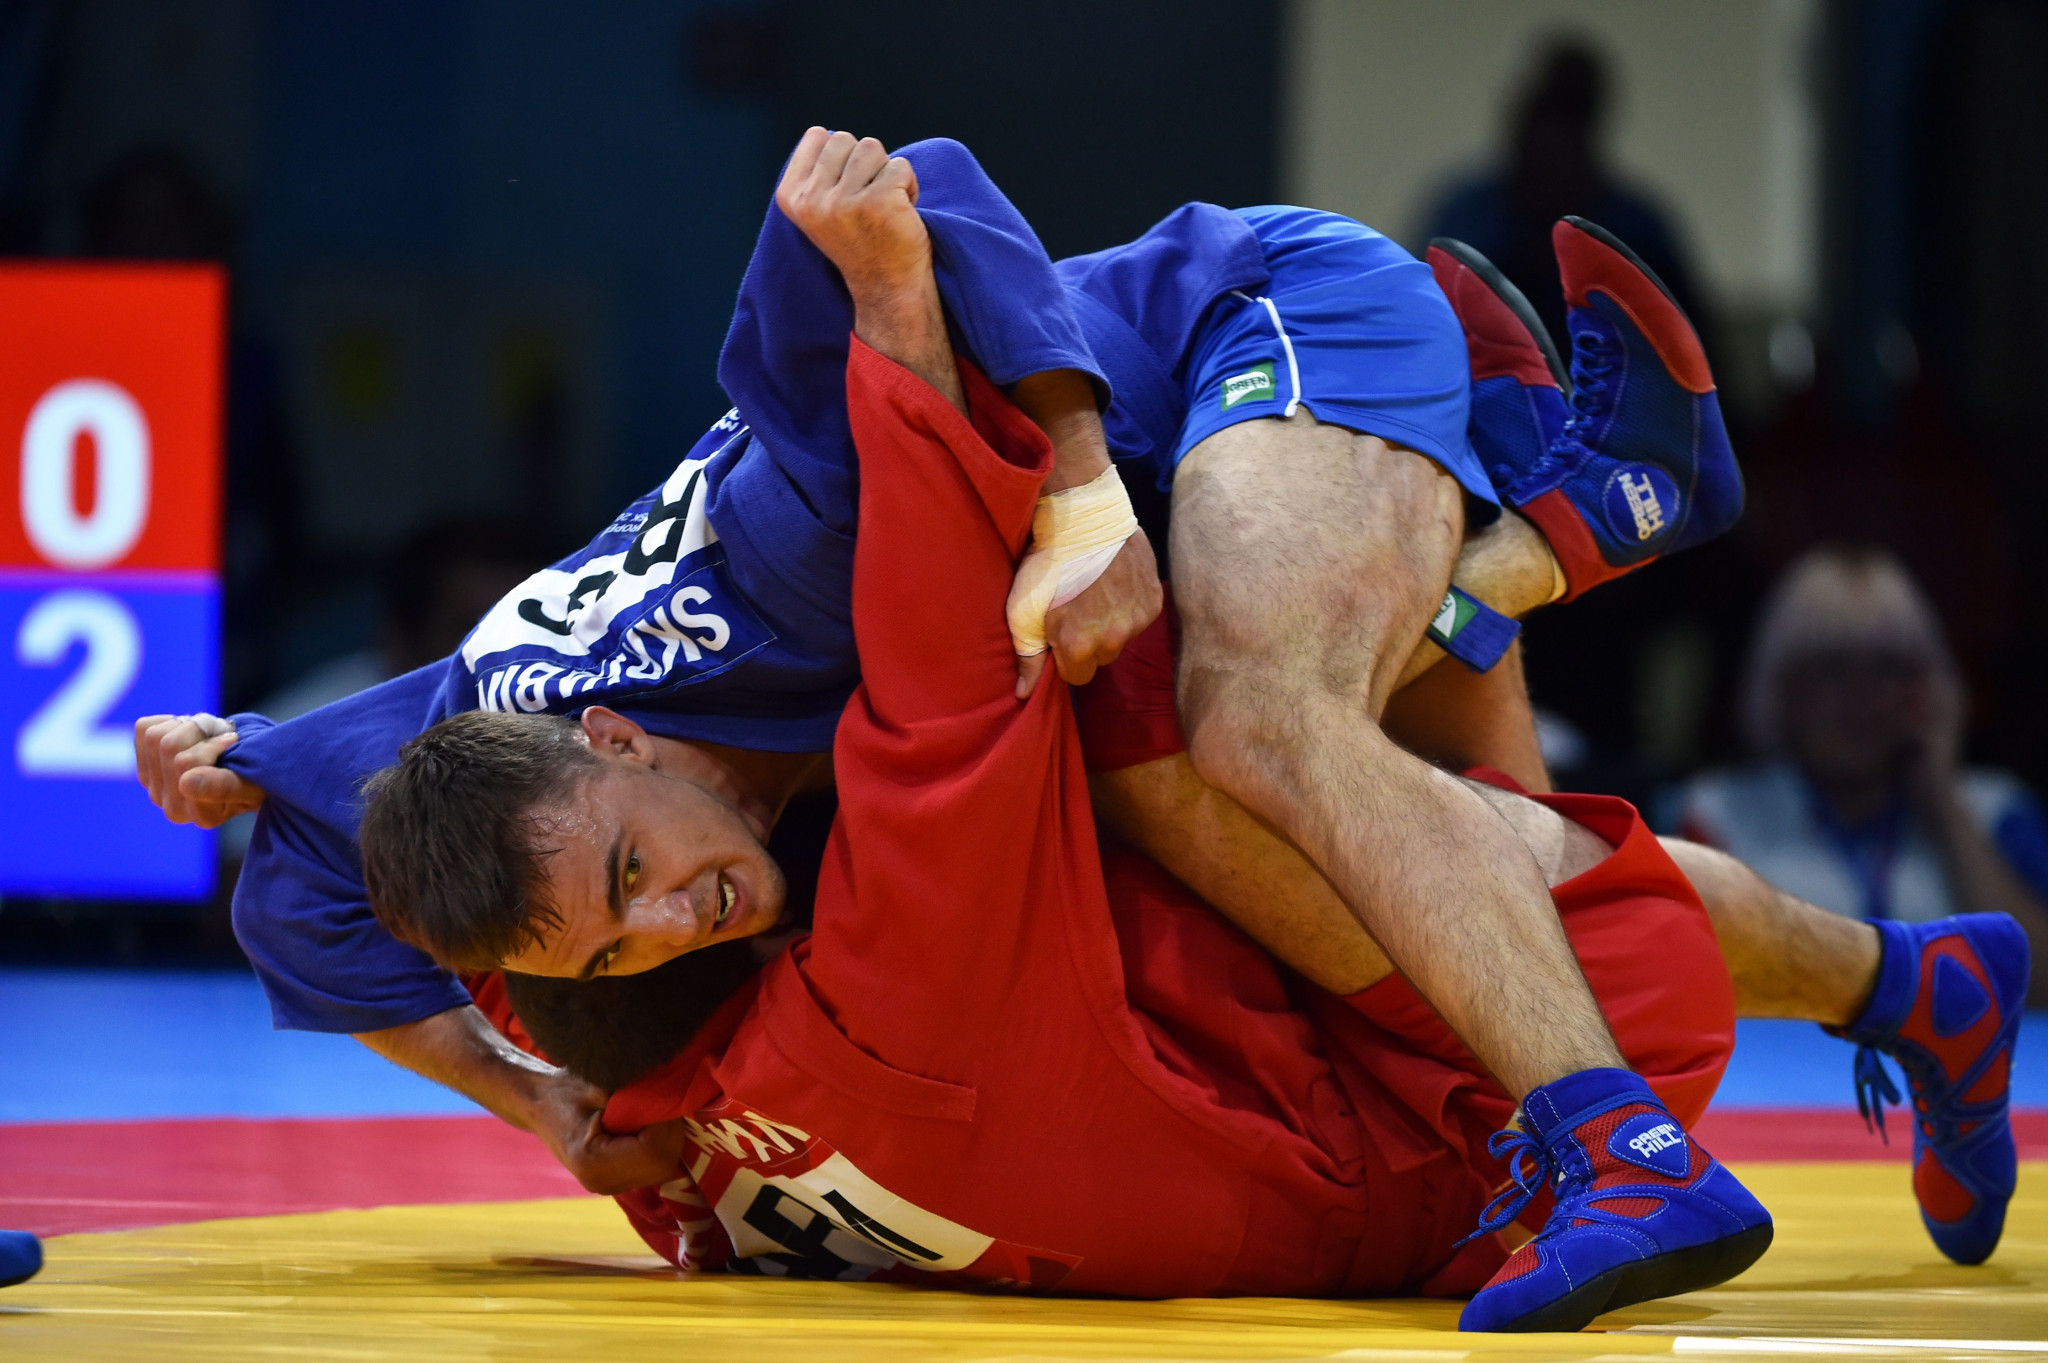 Sambo events have been suspended due to the coronavirus pandemic ©Getty Images